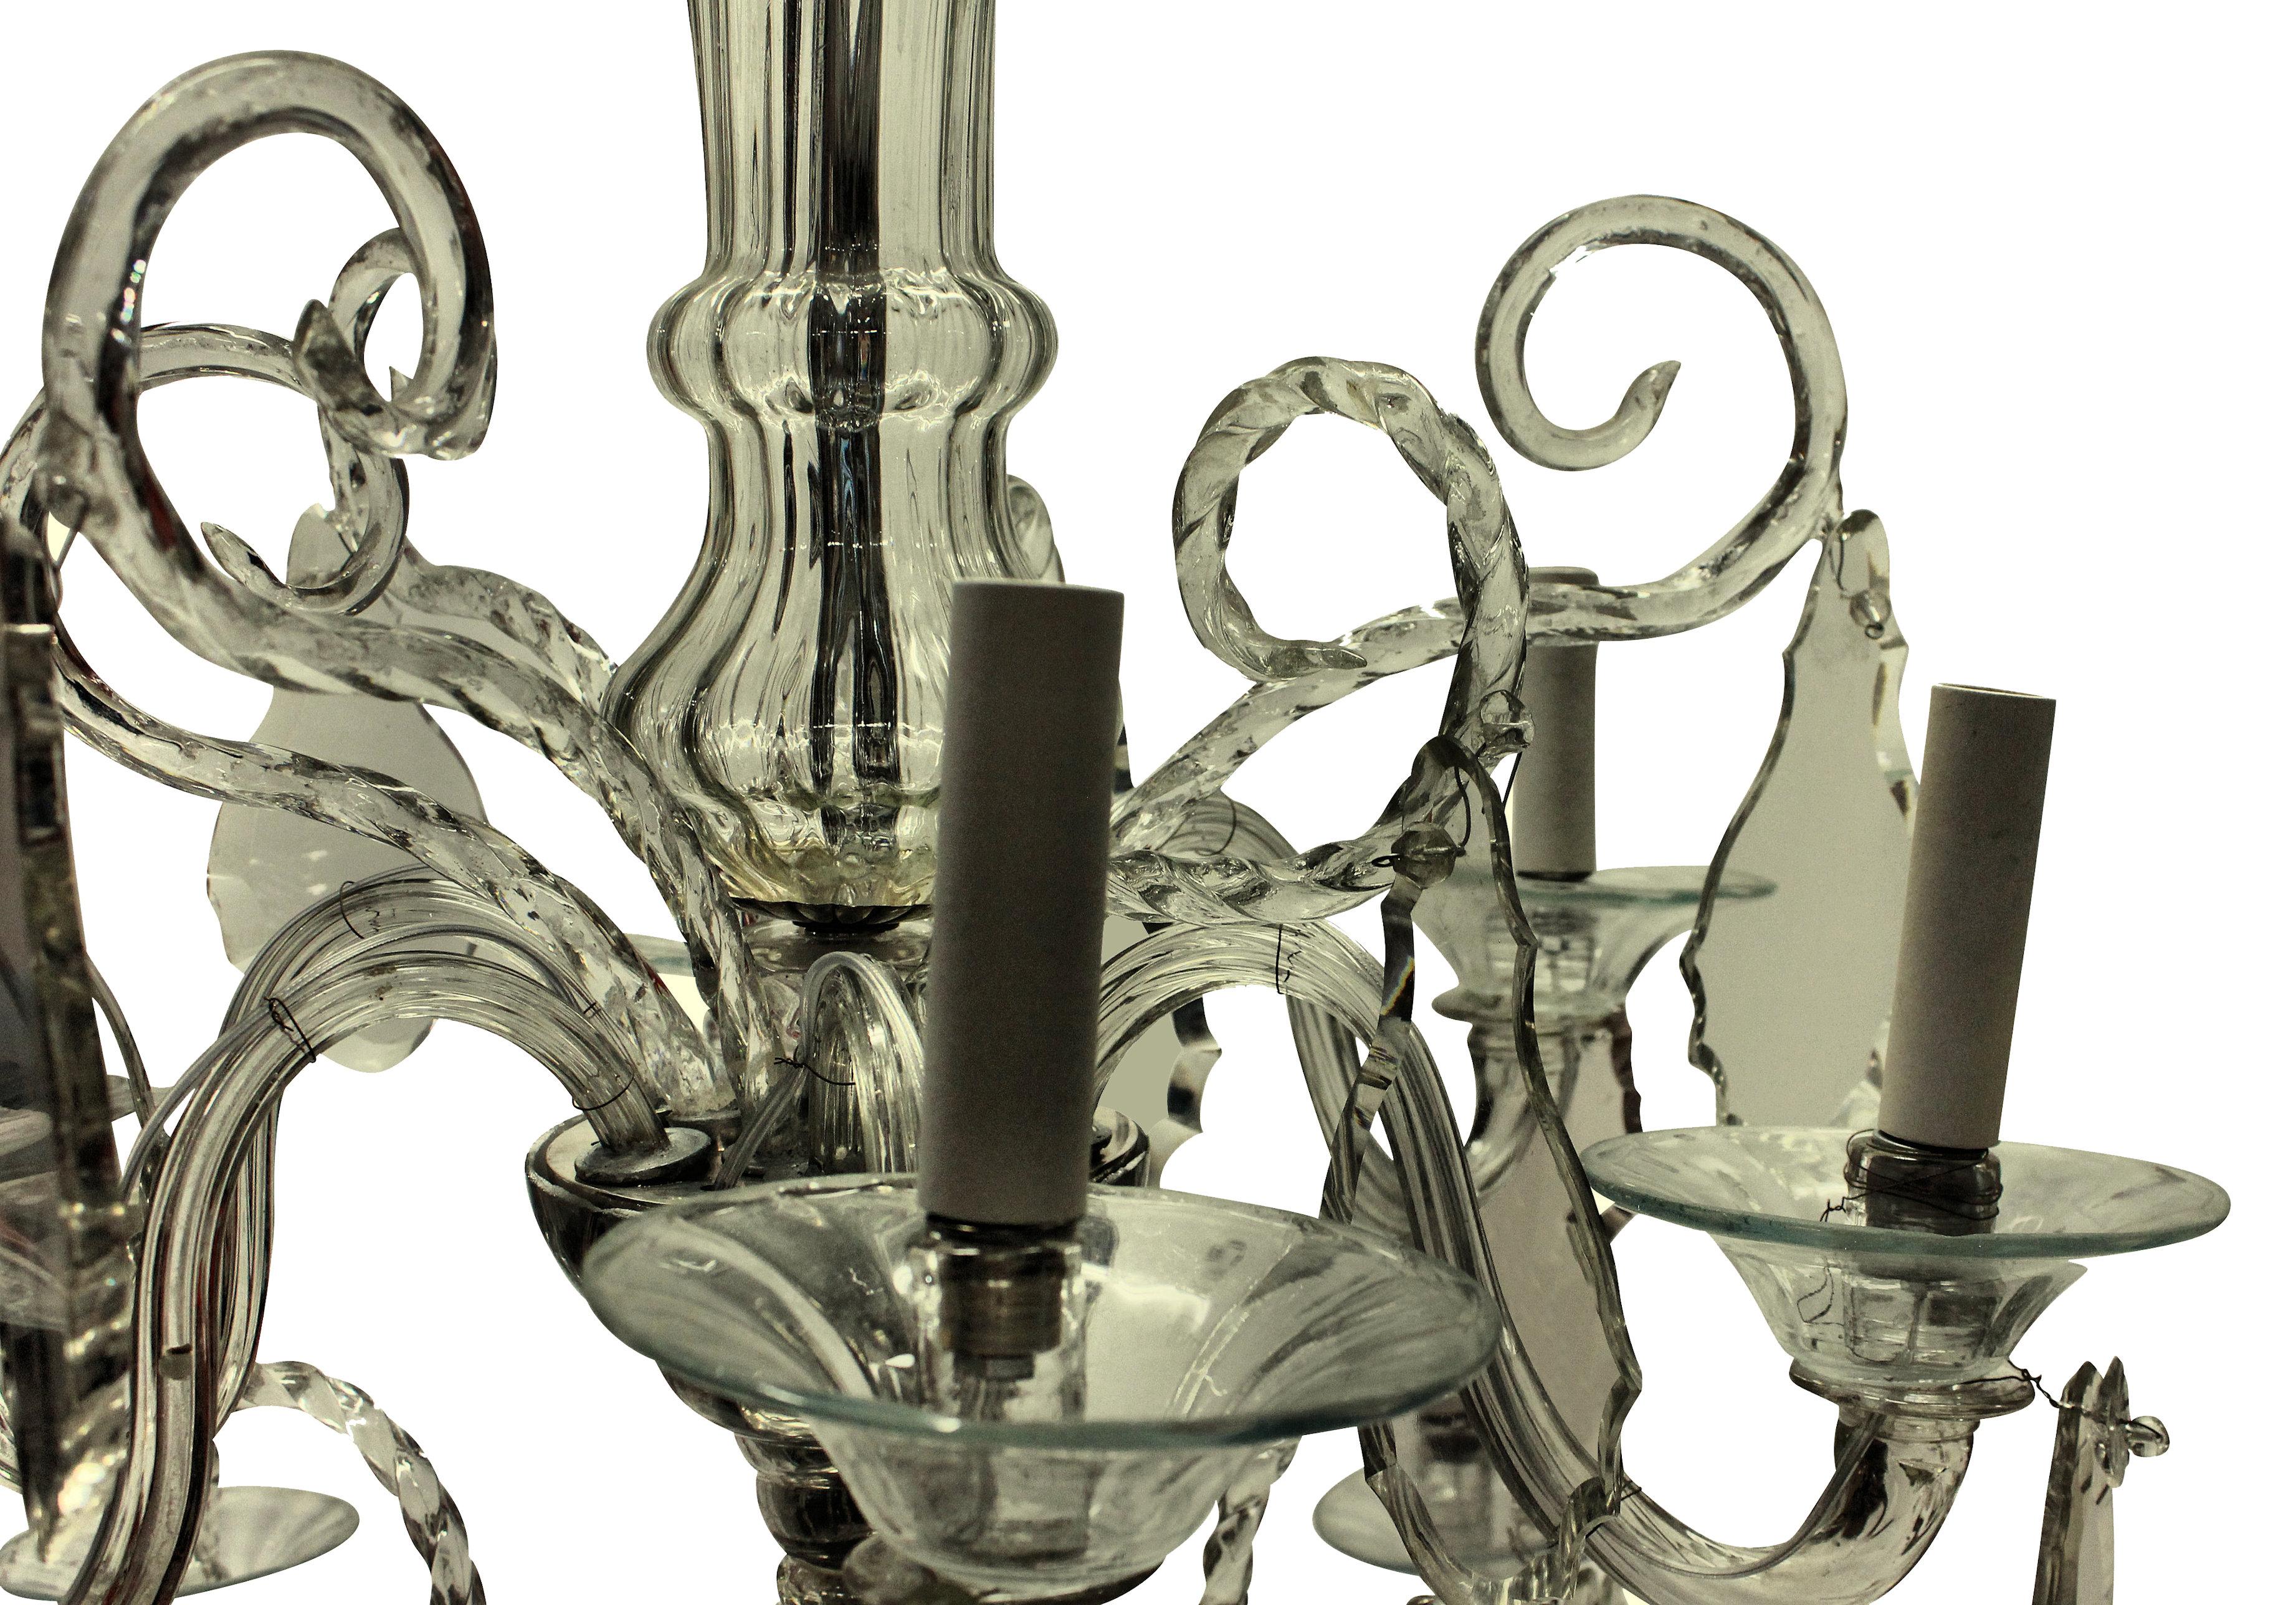 A fine Venetian chandelier, in hand blown glass, comprising two tiers of lights, with mirrored glass dishes.